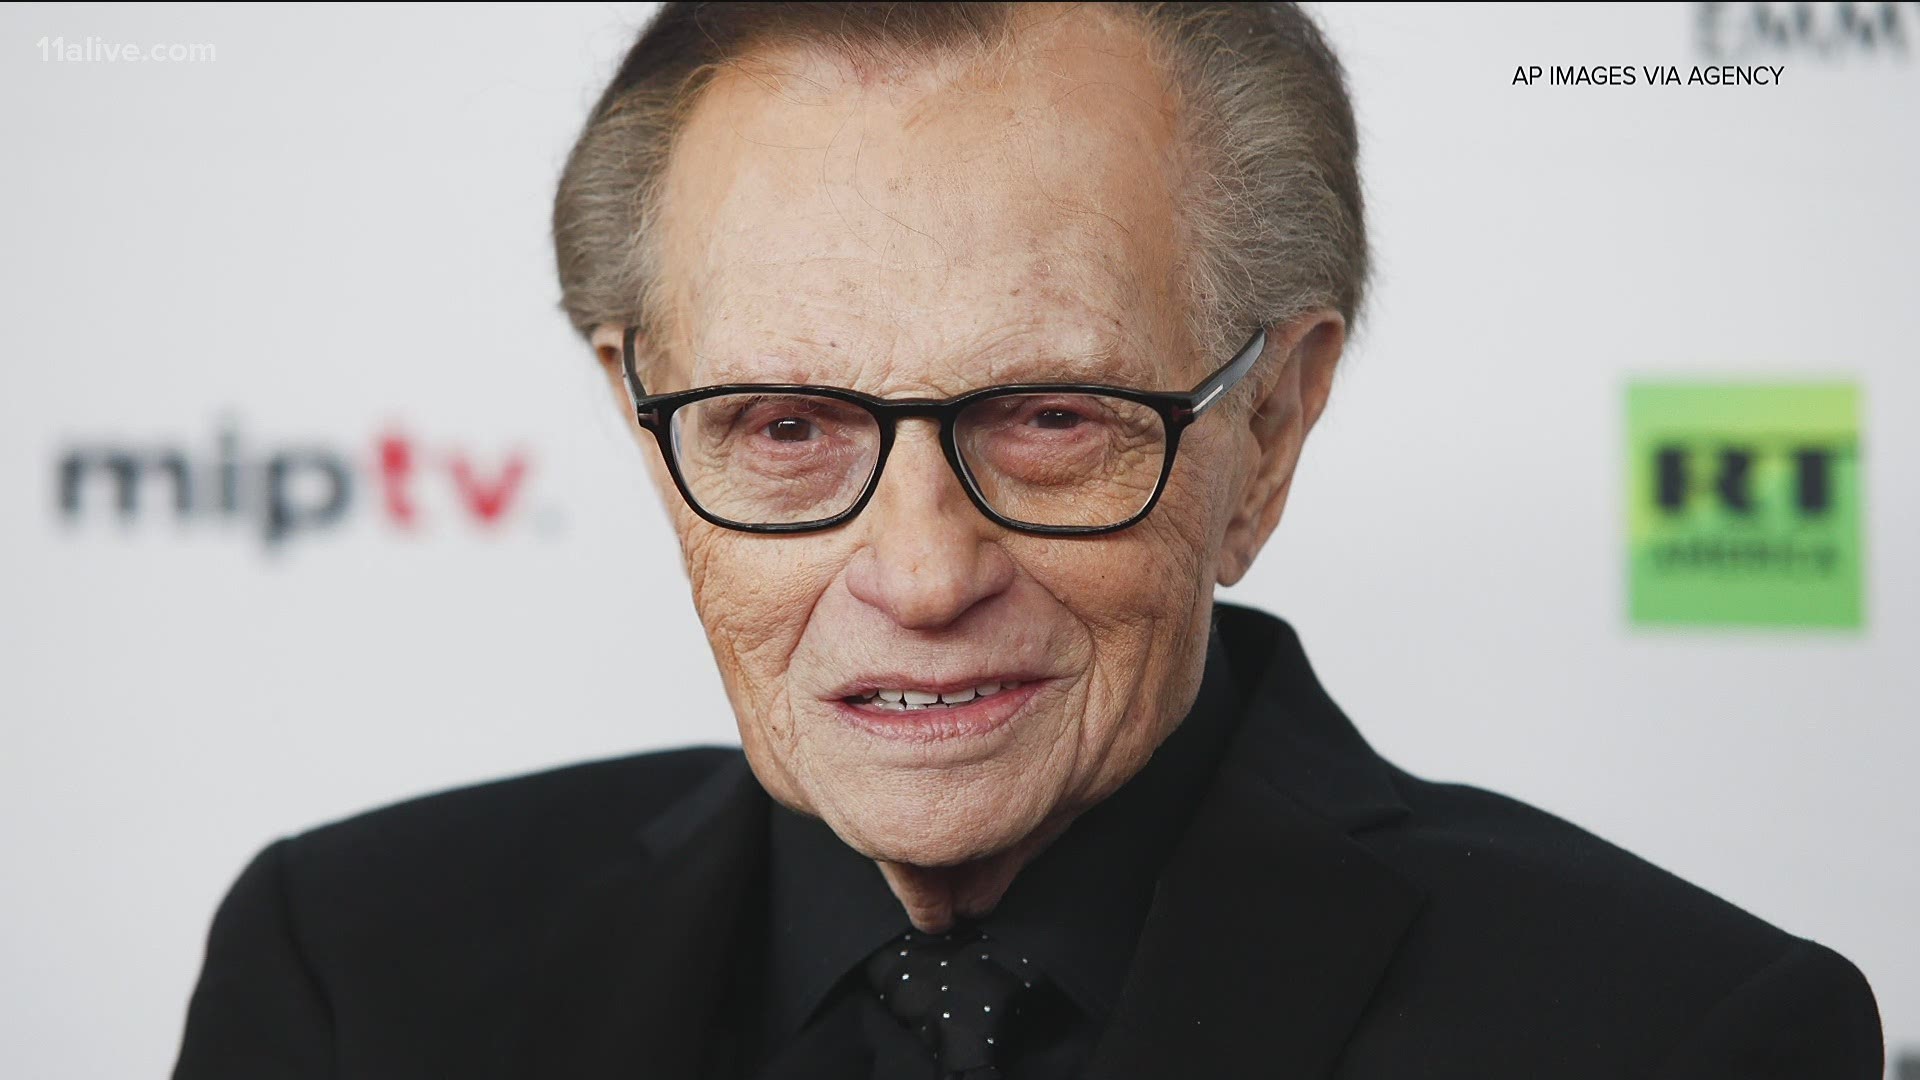 Legendary television and radio host Larry King has died at the age of 87.